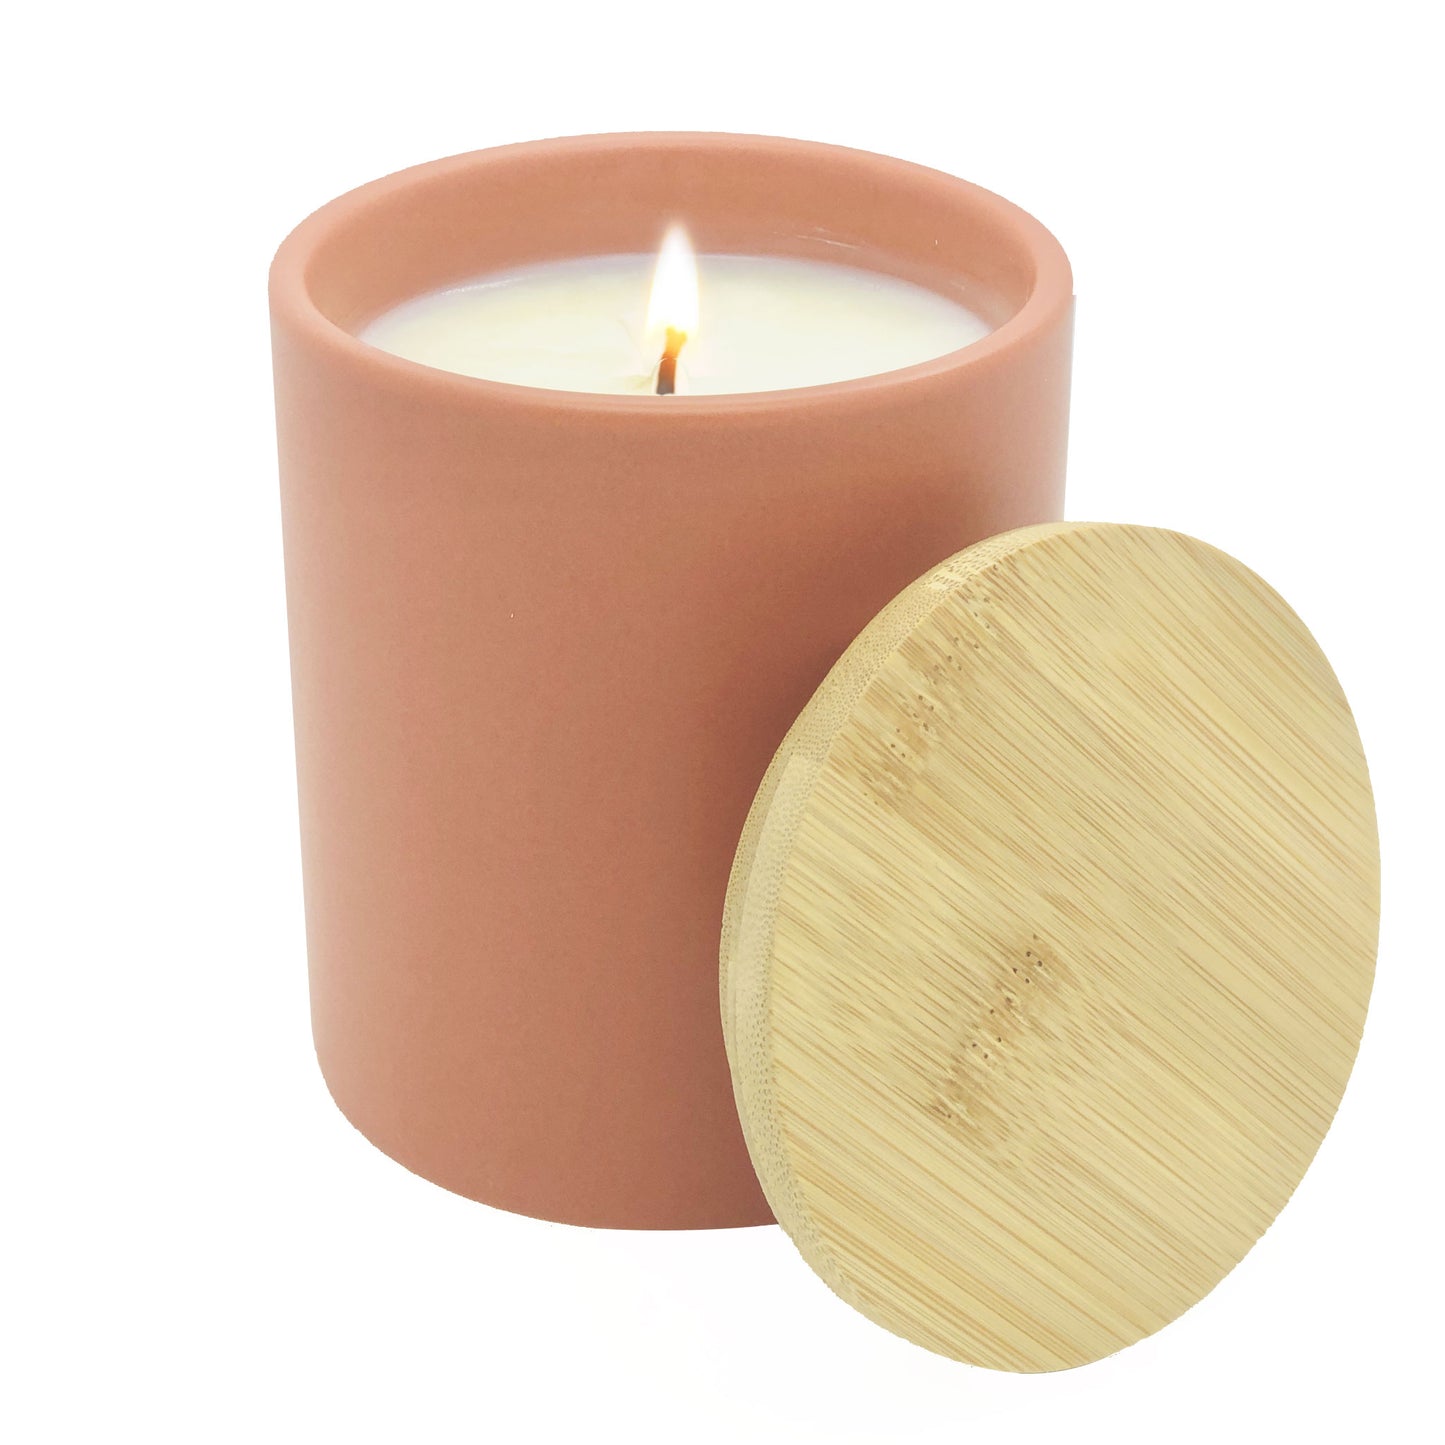  Best Chasing Autumn Signature Essential Oil Soy Candle in Salmon-Tinted Ceramic Tumbler Jar with Bamboo Lid